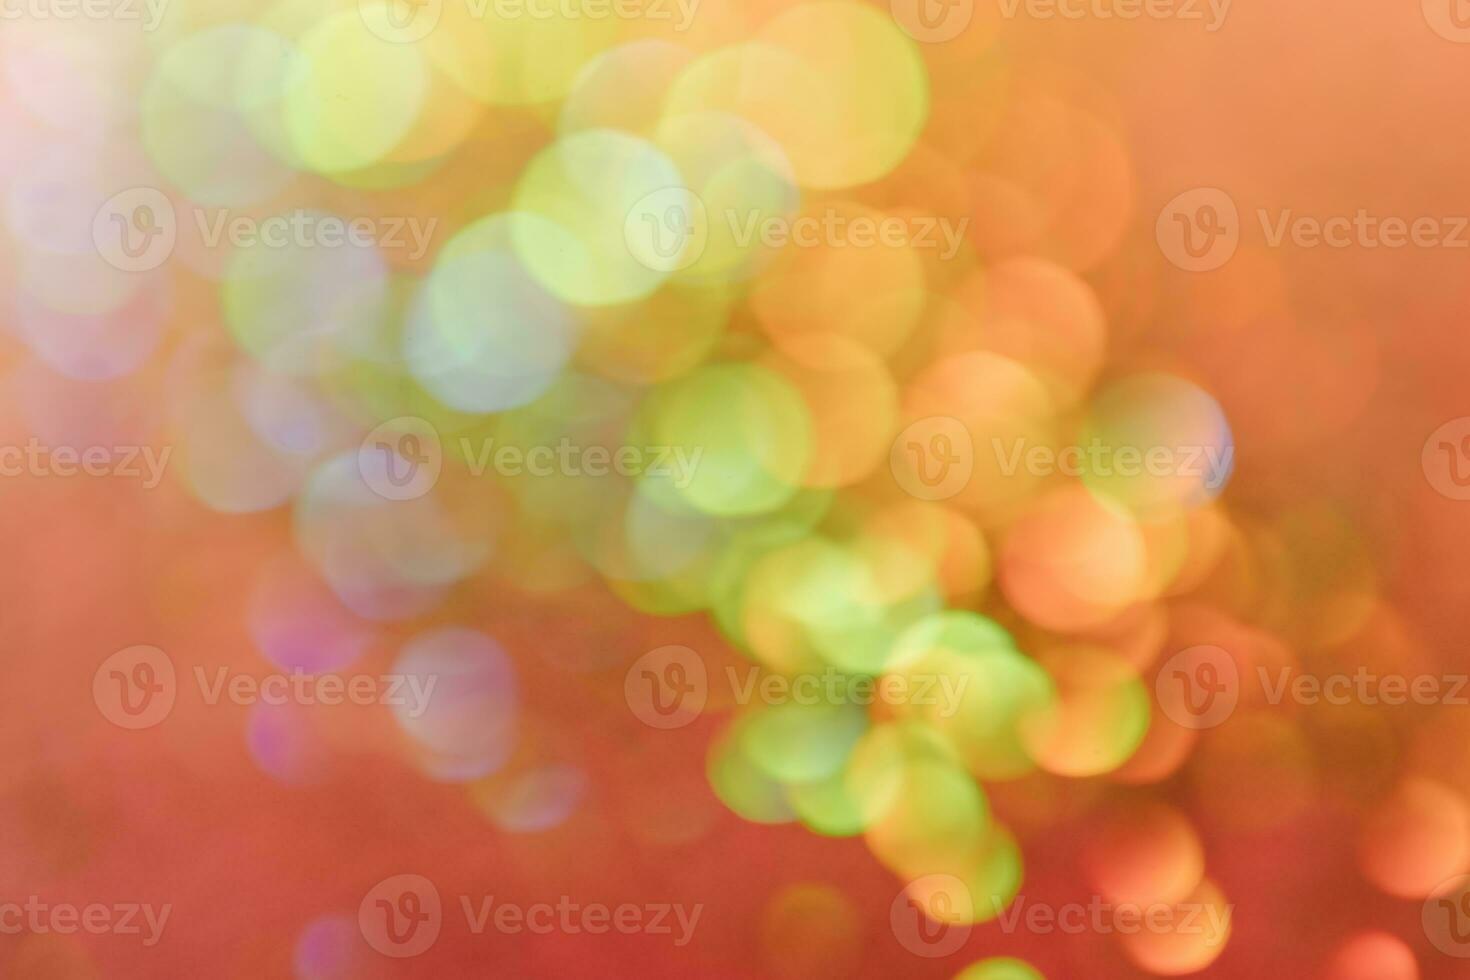 Abstract sequin background with shining festive bokeh. photo